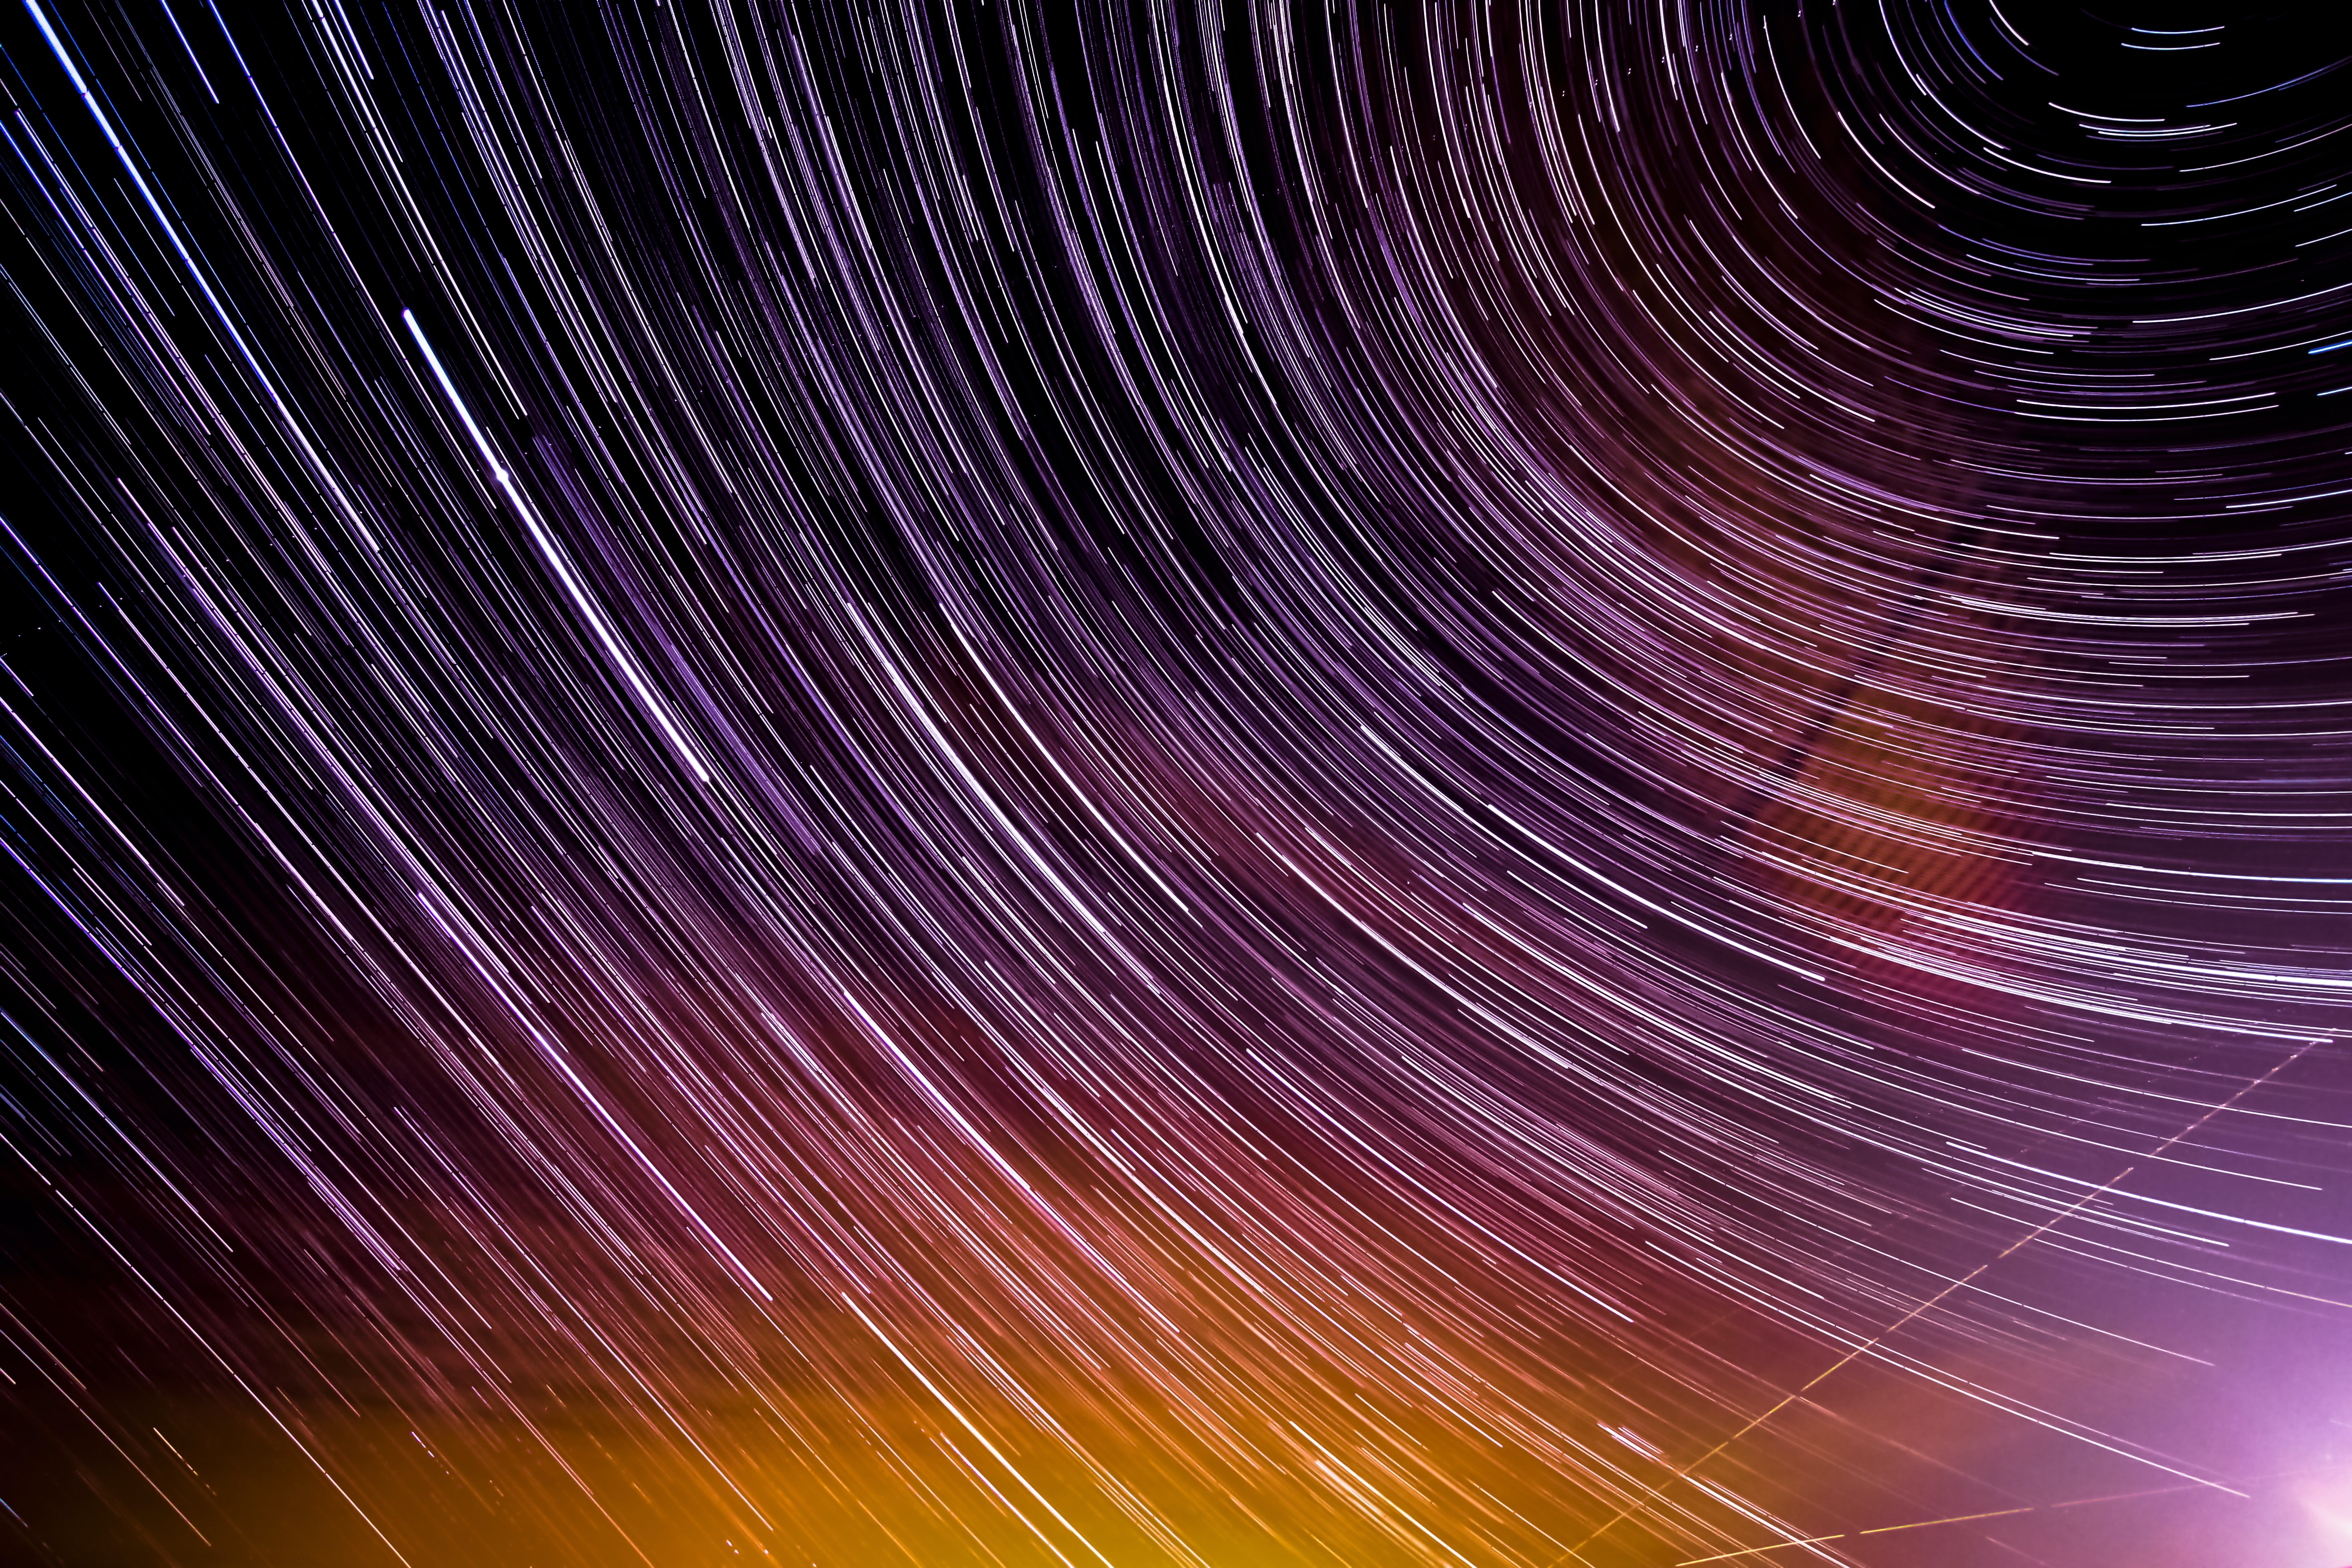 HD wallpaper, Timelapse, Night Sky, Pattern, Purple Light, Science, Star Trails, Astronomy, Outer Space, Long Exposure, 5K